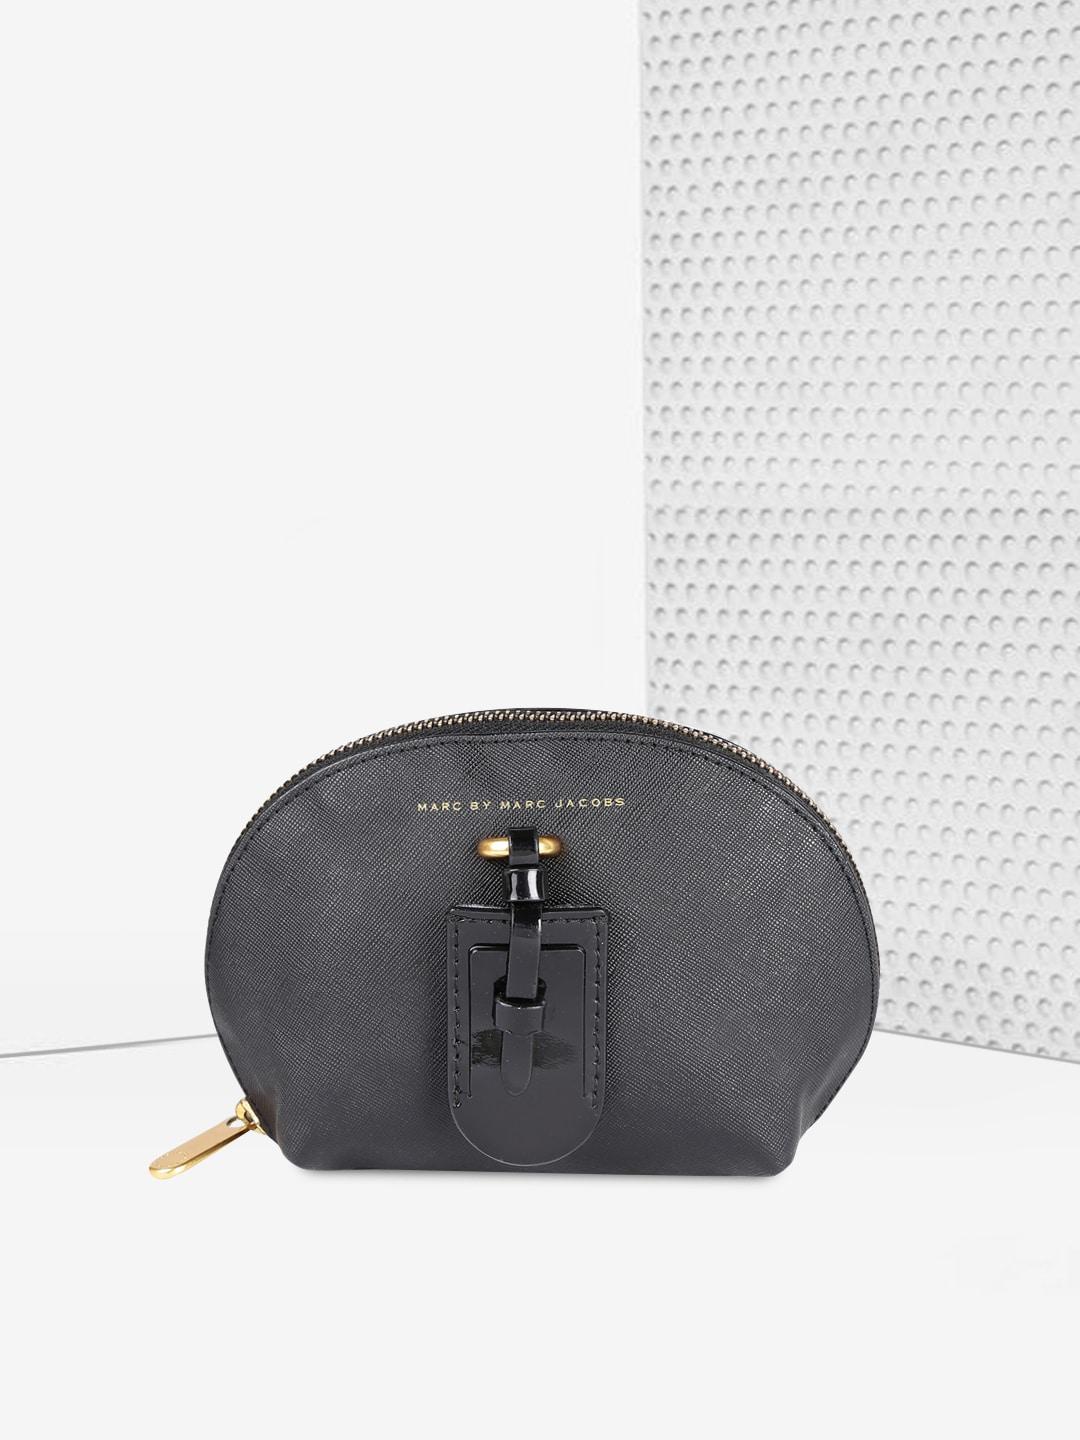 marc-jacobs-black-solid-leather-purse